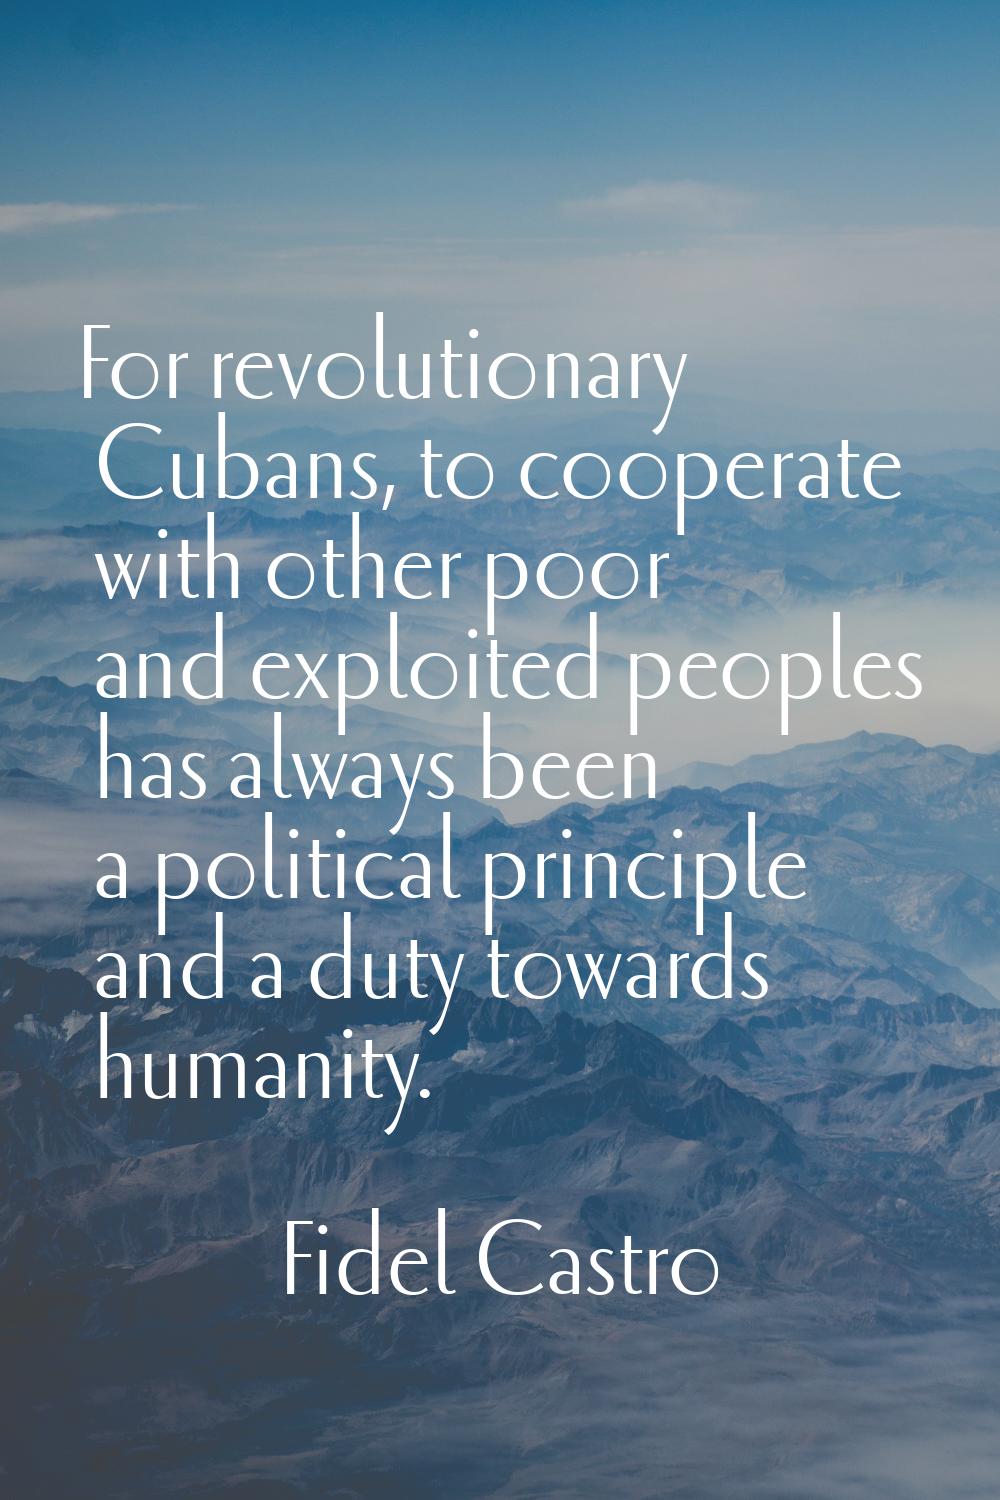 For revolutionary Cubans, to cooperate with other poor and exploited peoples has always been a poli